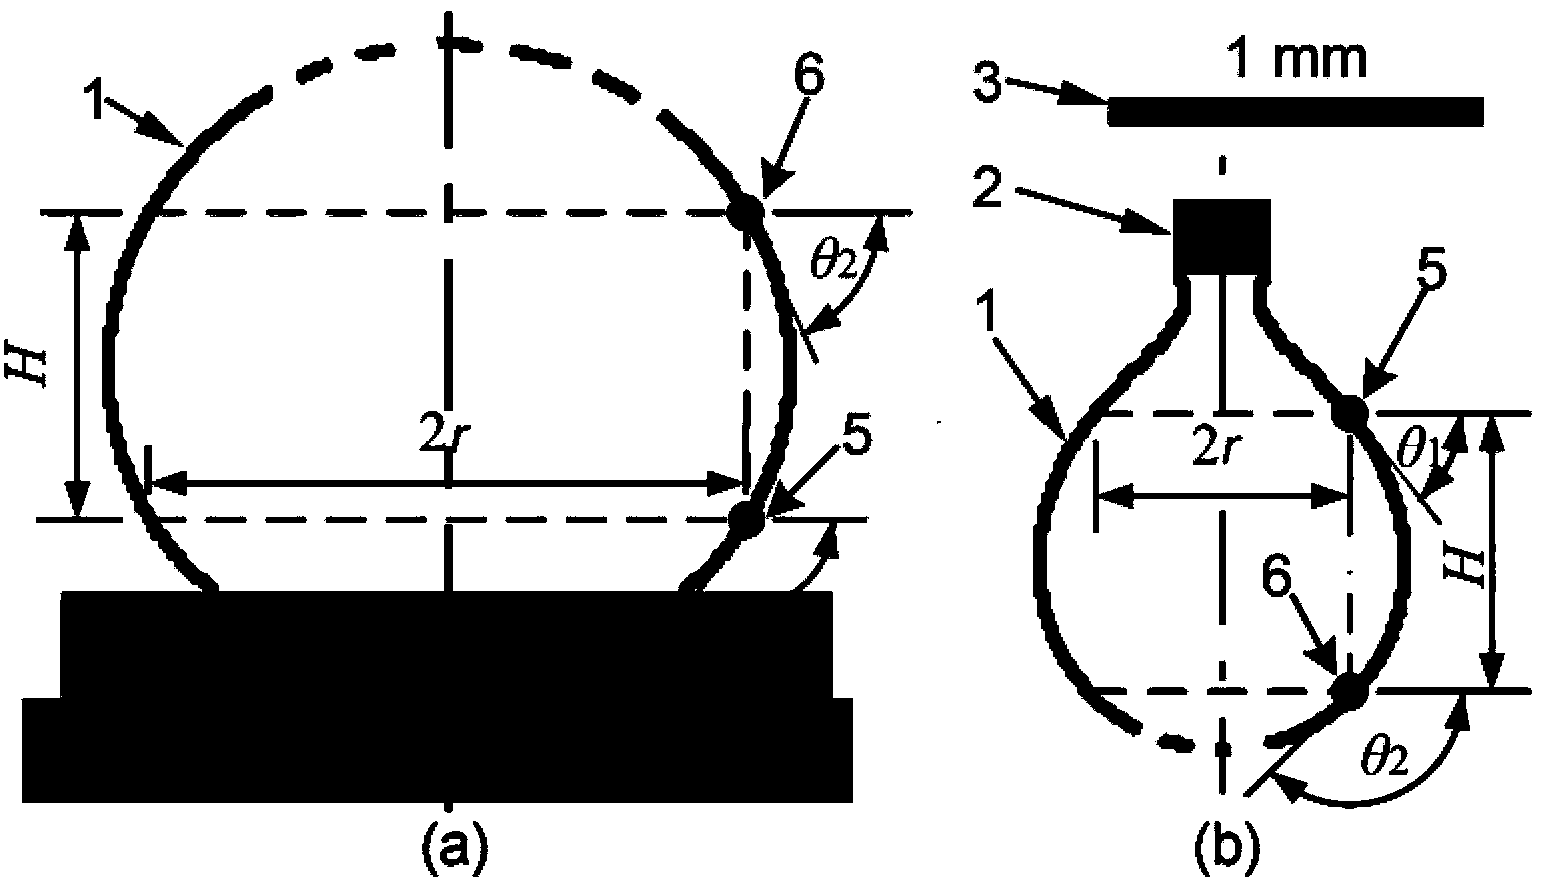 Measurement method of liquid surface tension based on two measurement points of drop profile curve